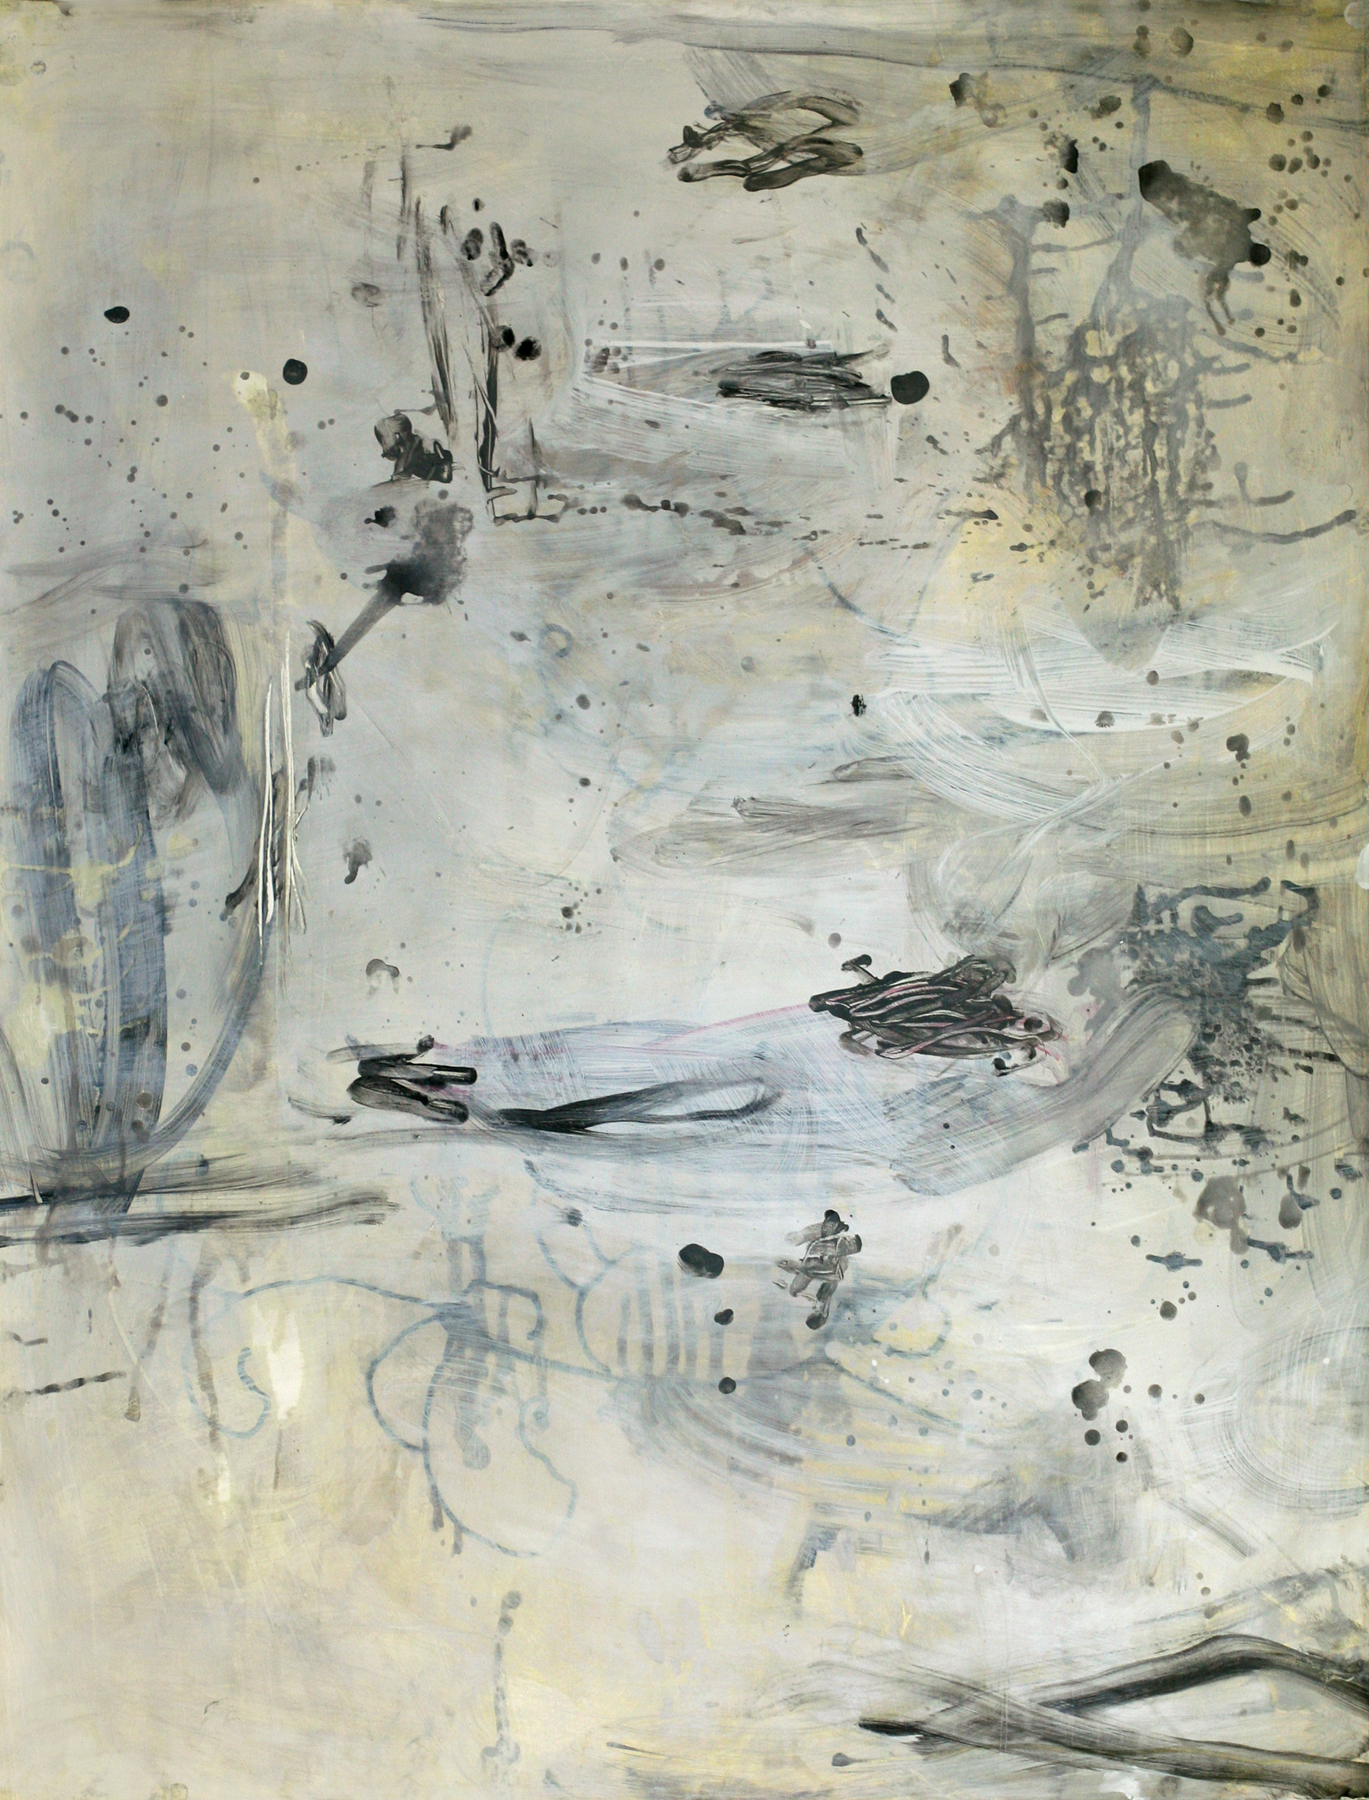 Milarepa 07, acrylic and paste on paper on board, 50" x 38" (private collection)